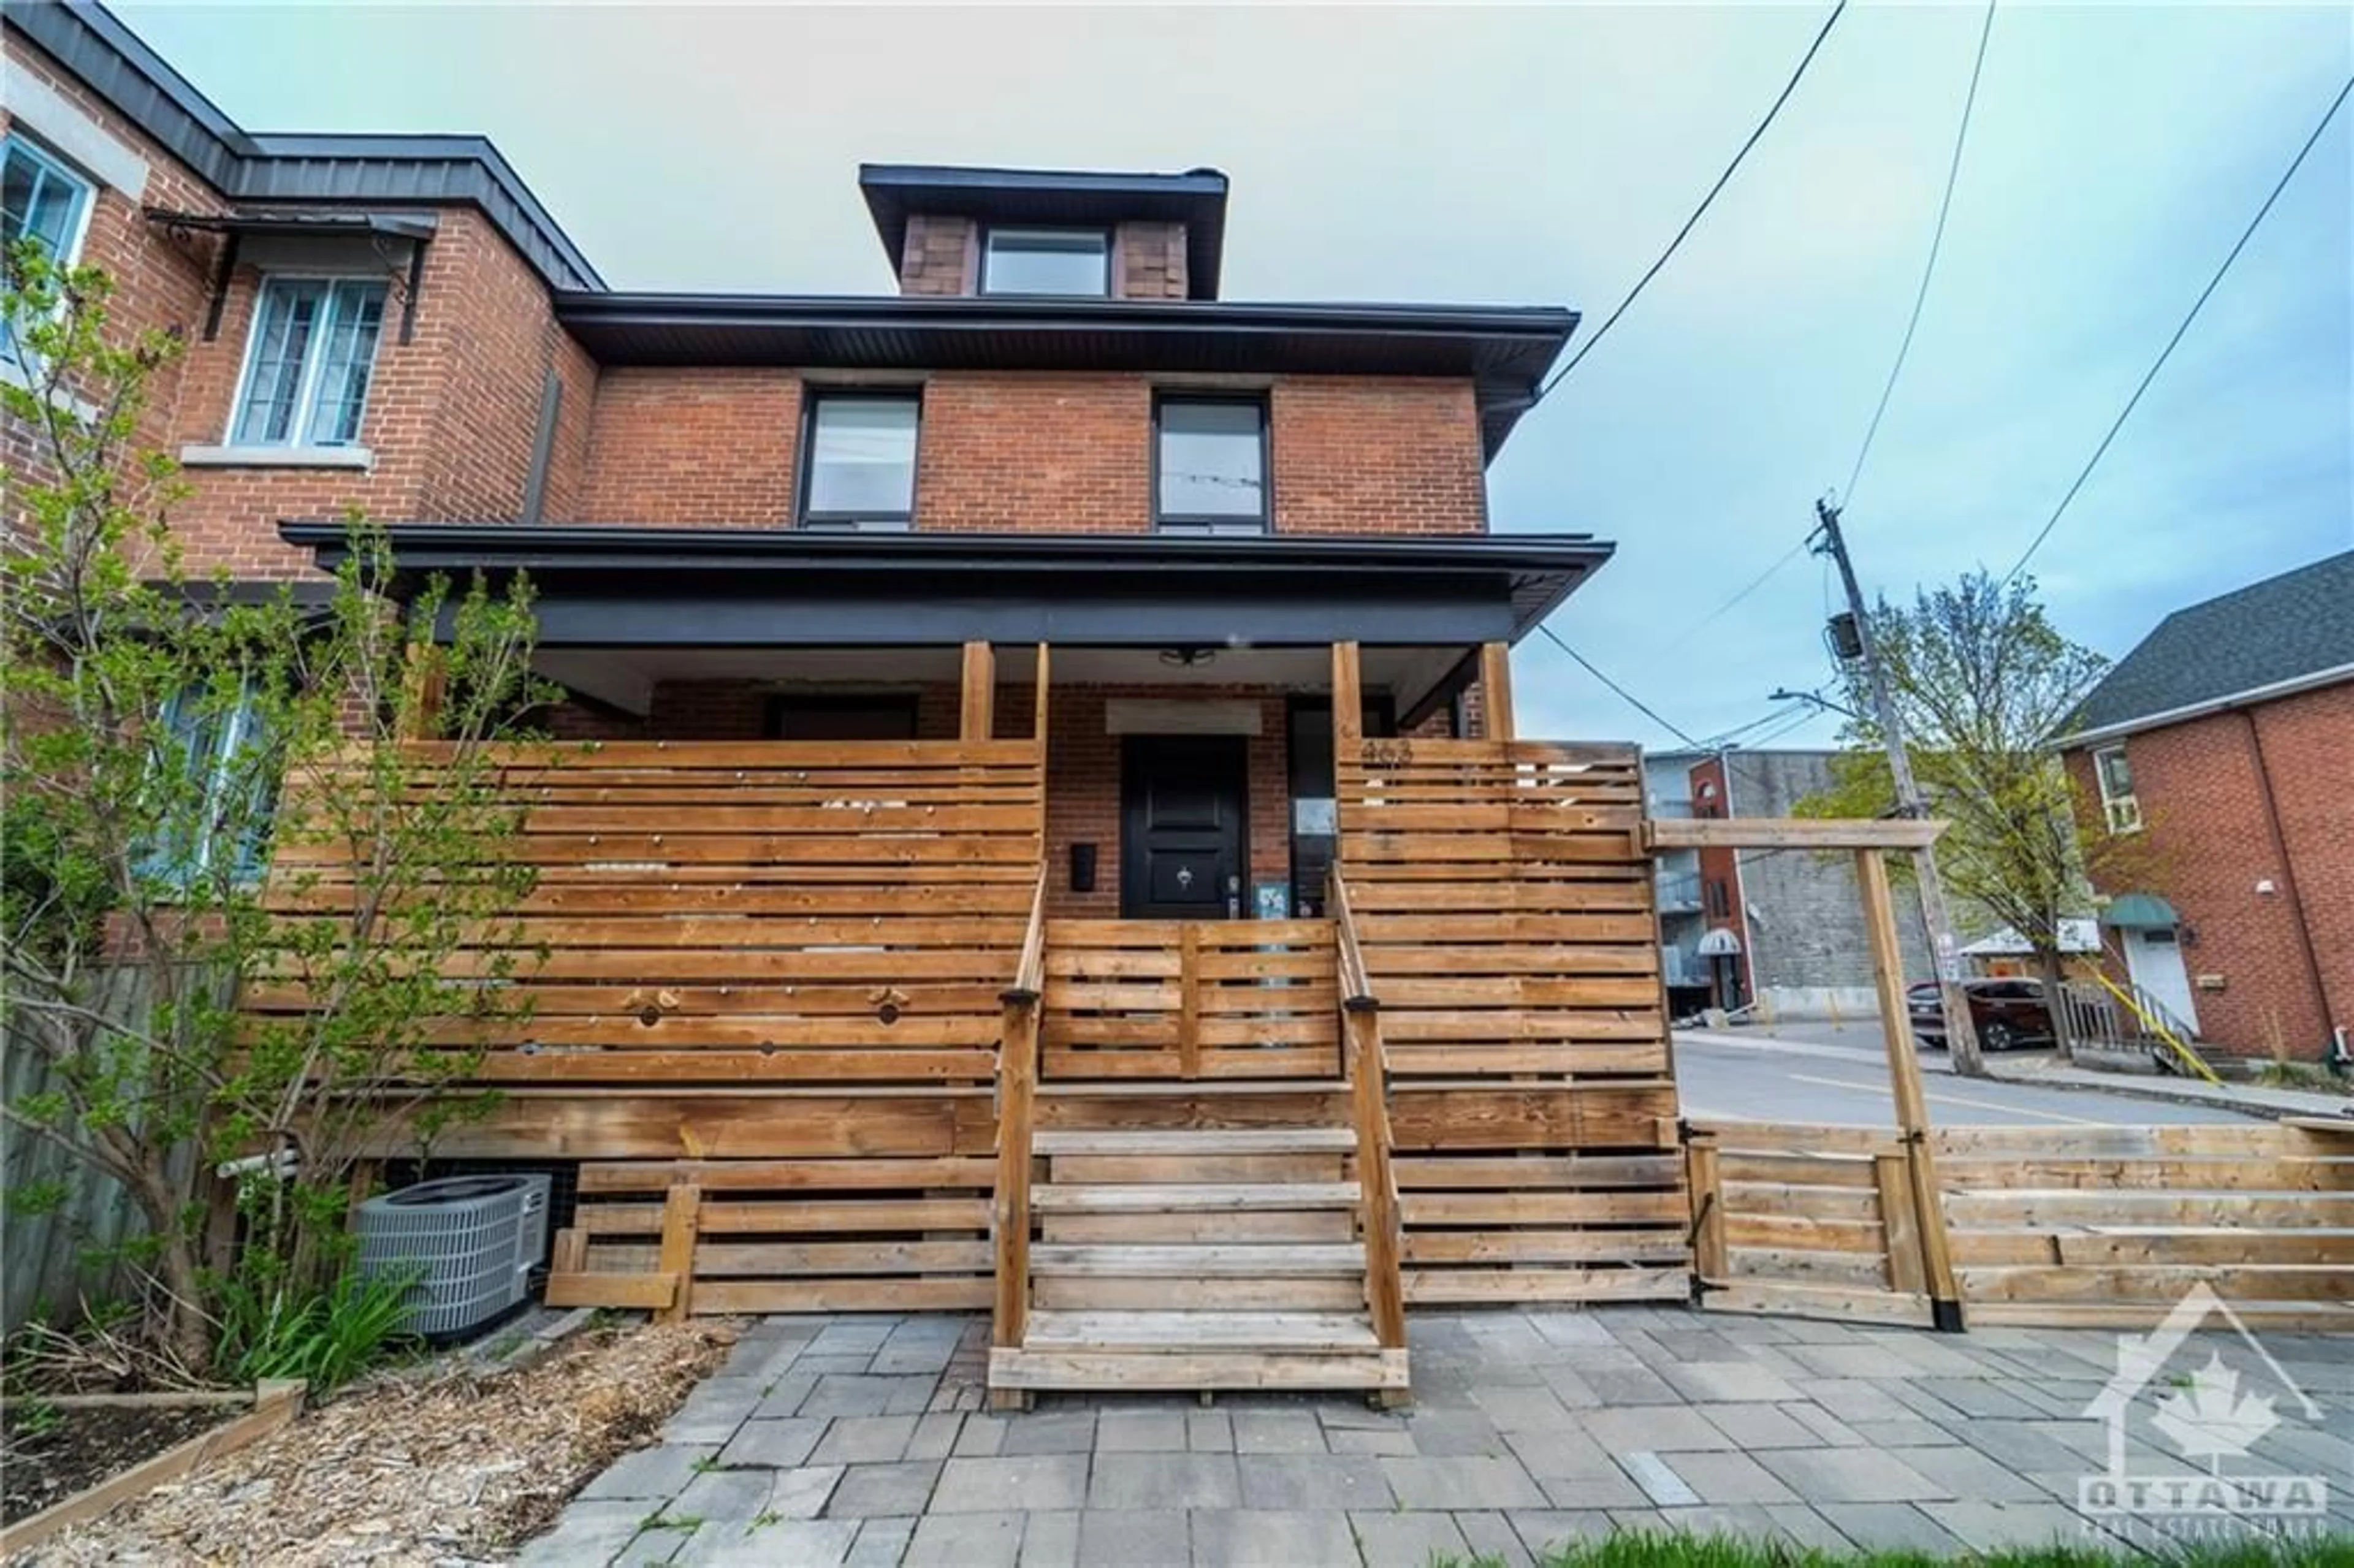 Home with brick exterior material for 463 PARKDALE Ave, Ottawa Ontario K1Y 1H1